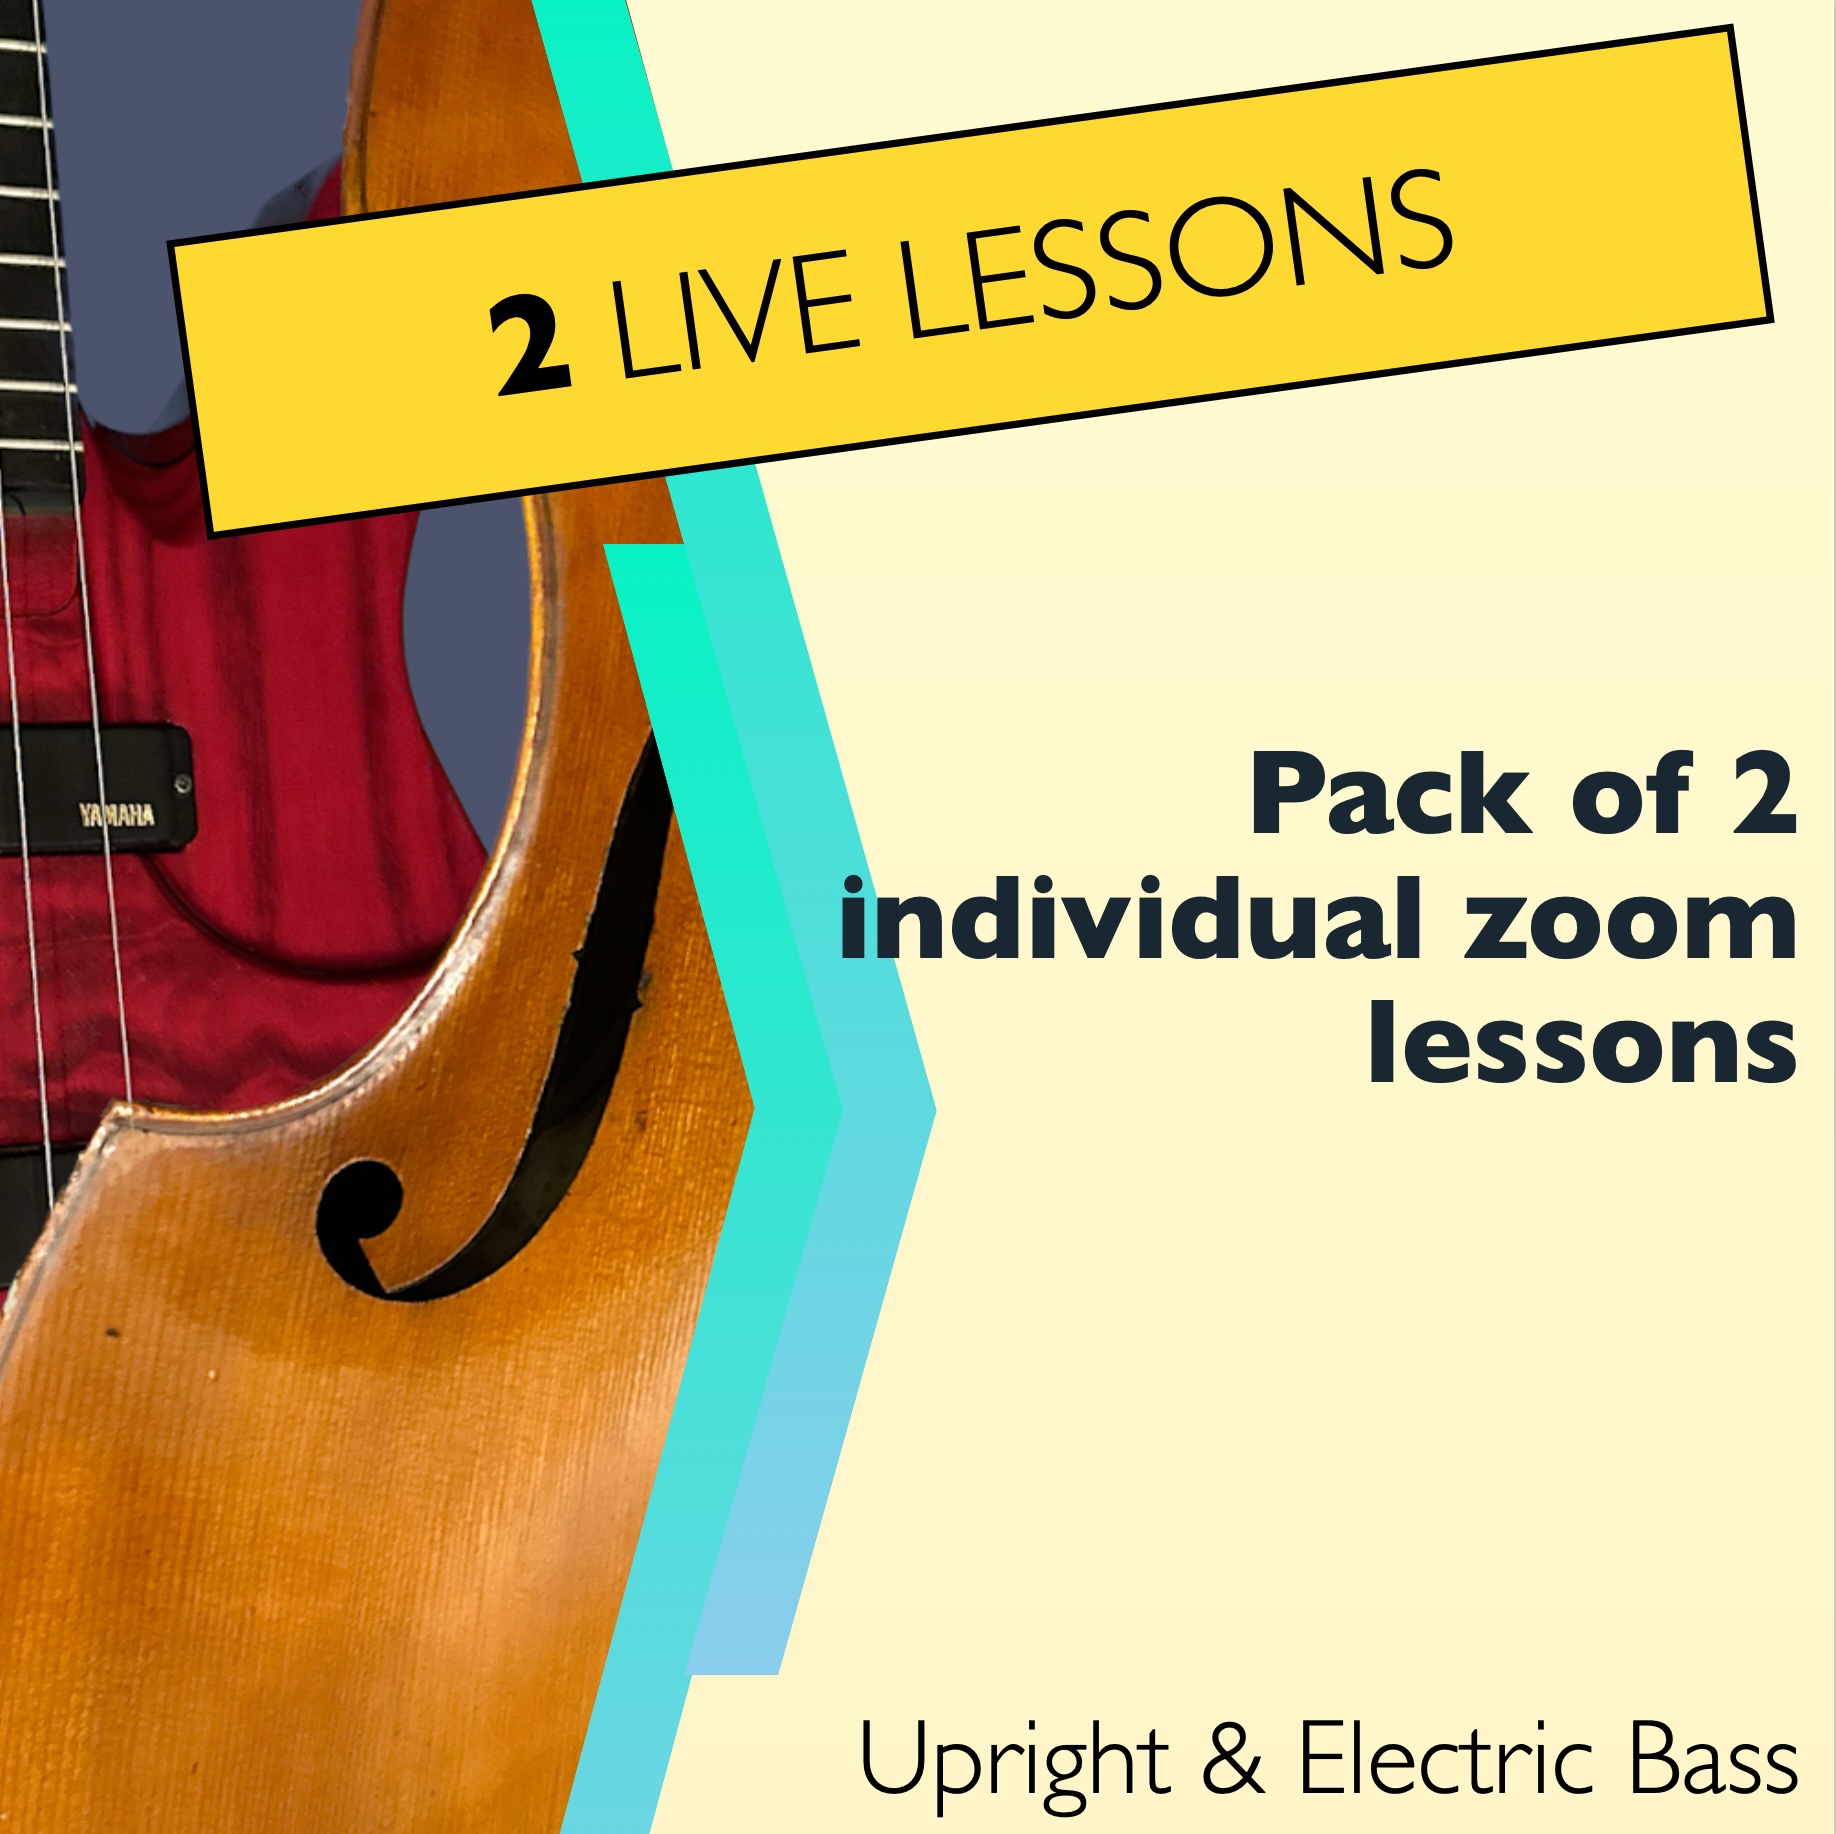 Pack of 2 individual zoom lessons